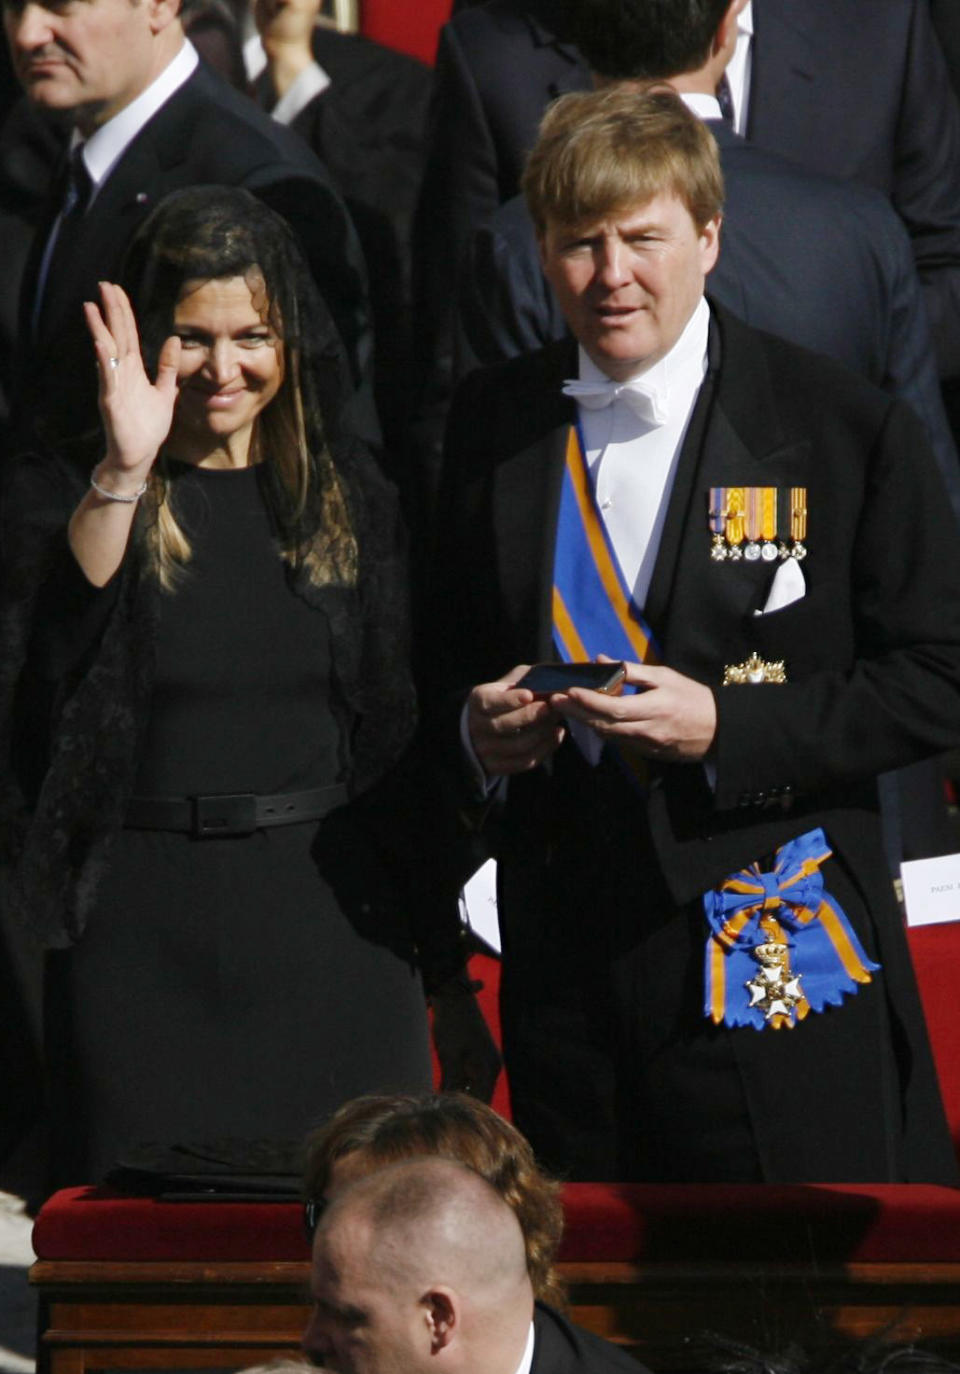 Rules are tricky: Queen&nbsp;Maxima of the Netherlands remained Catholic after her marriage, but the Dutch royal family is protestant. She wears black in the presence of the pope, a fellow Argentine, as demonstrated at his inauguration in 2013.